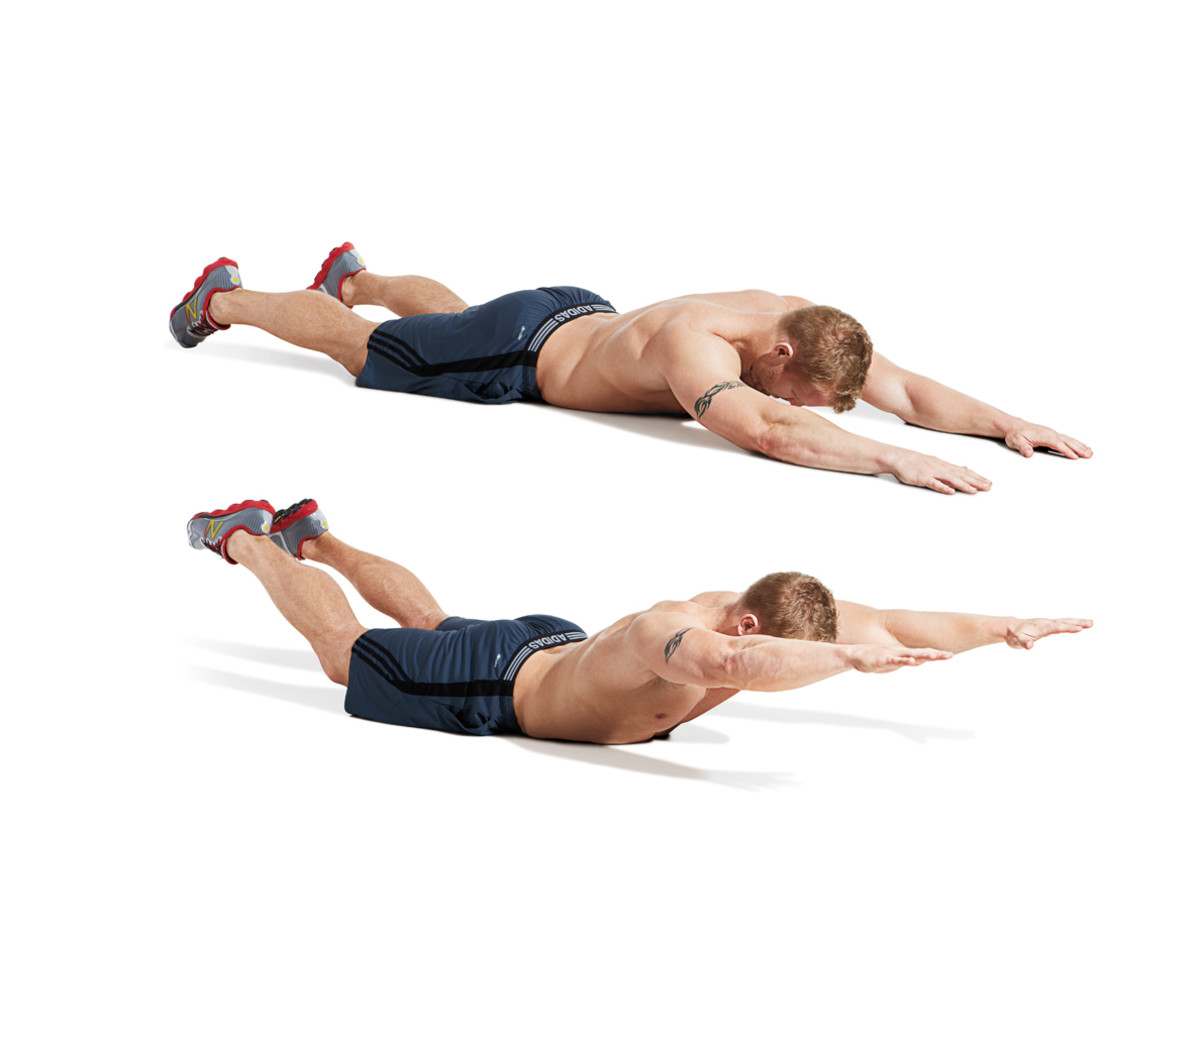 Best Bodyweight Back Exercises: 10 Moves to Add to Your Routine